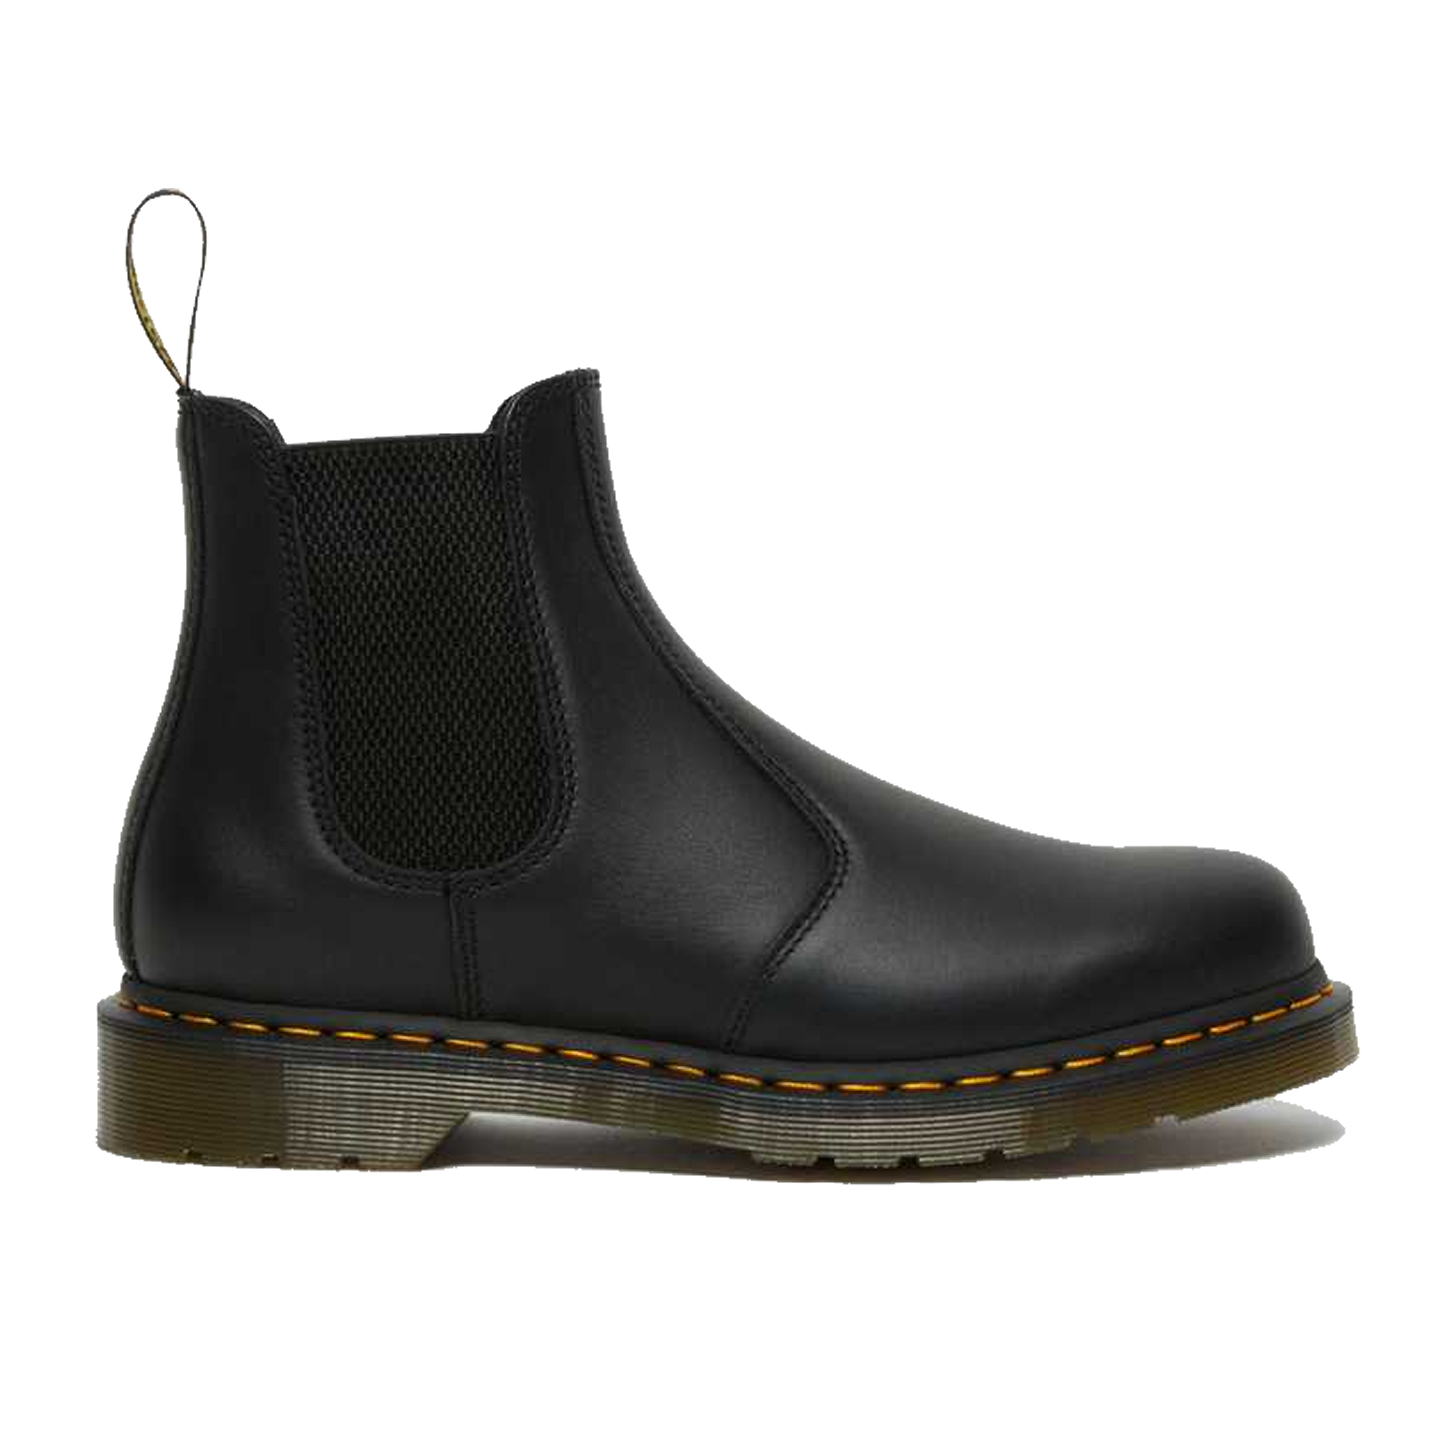 W 2976 NAPPA LEATHER CHELSEA BOOTS - BLACK